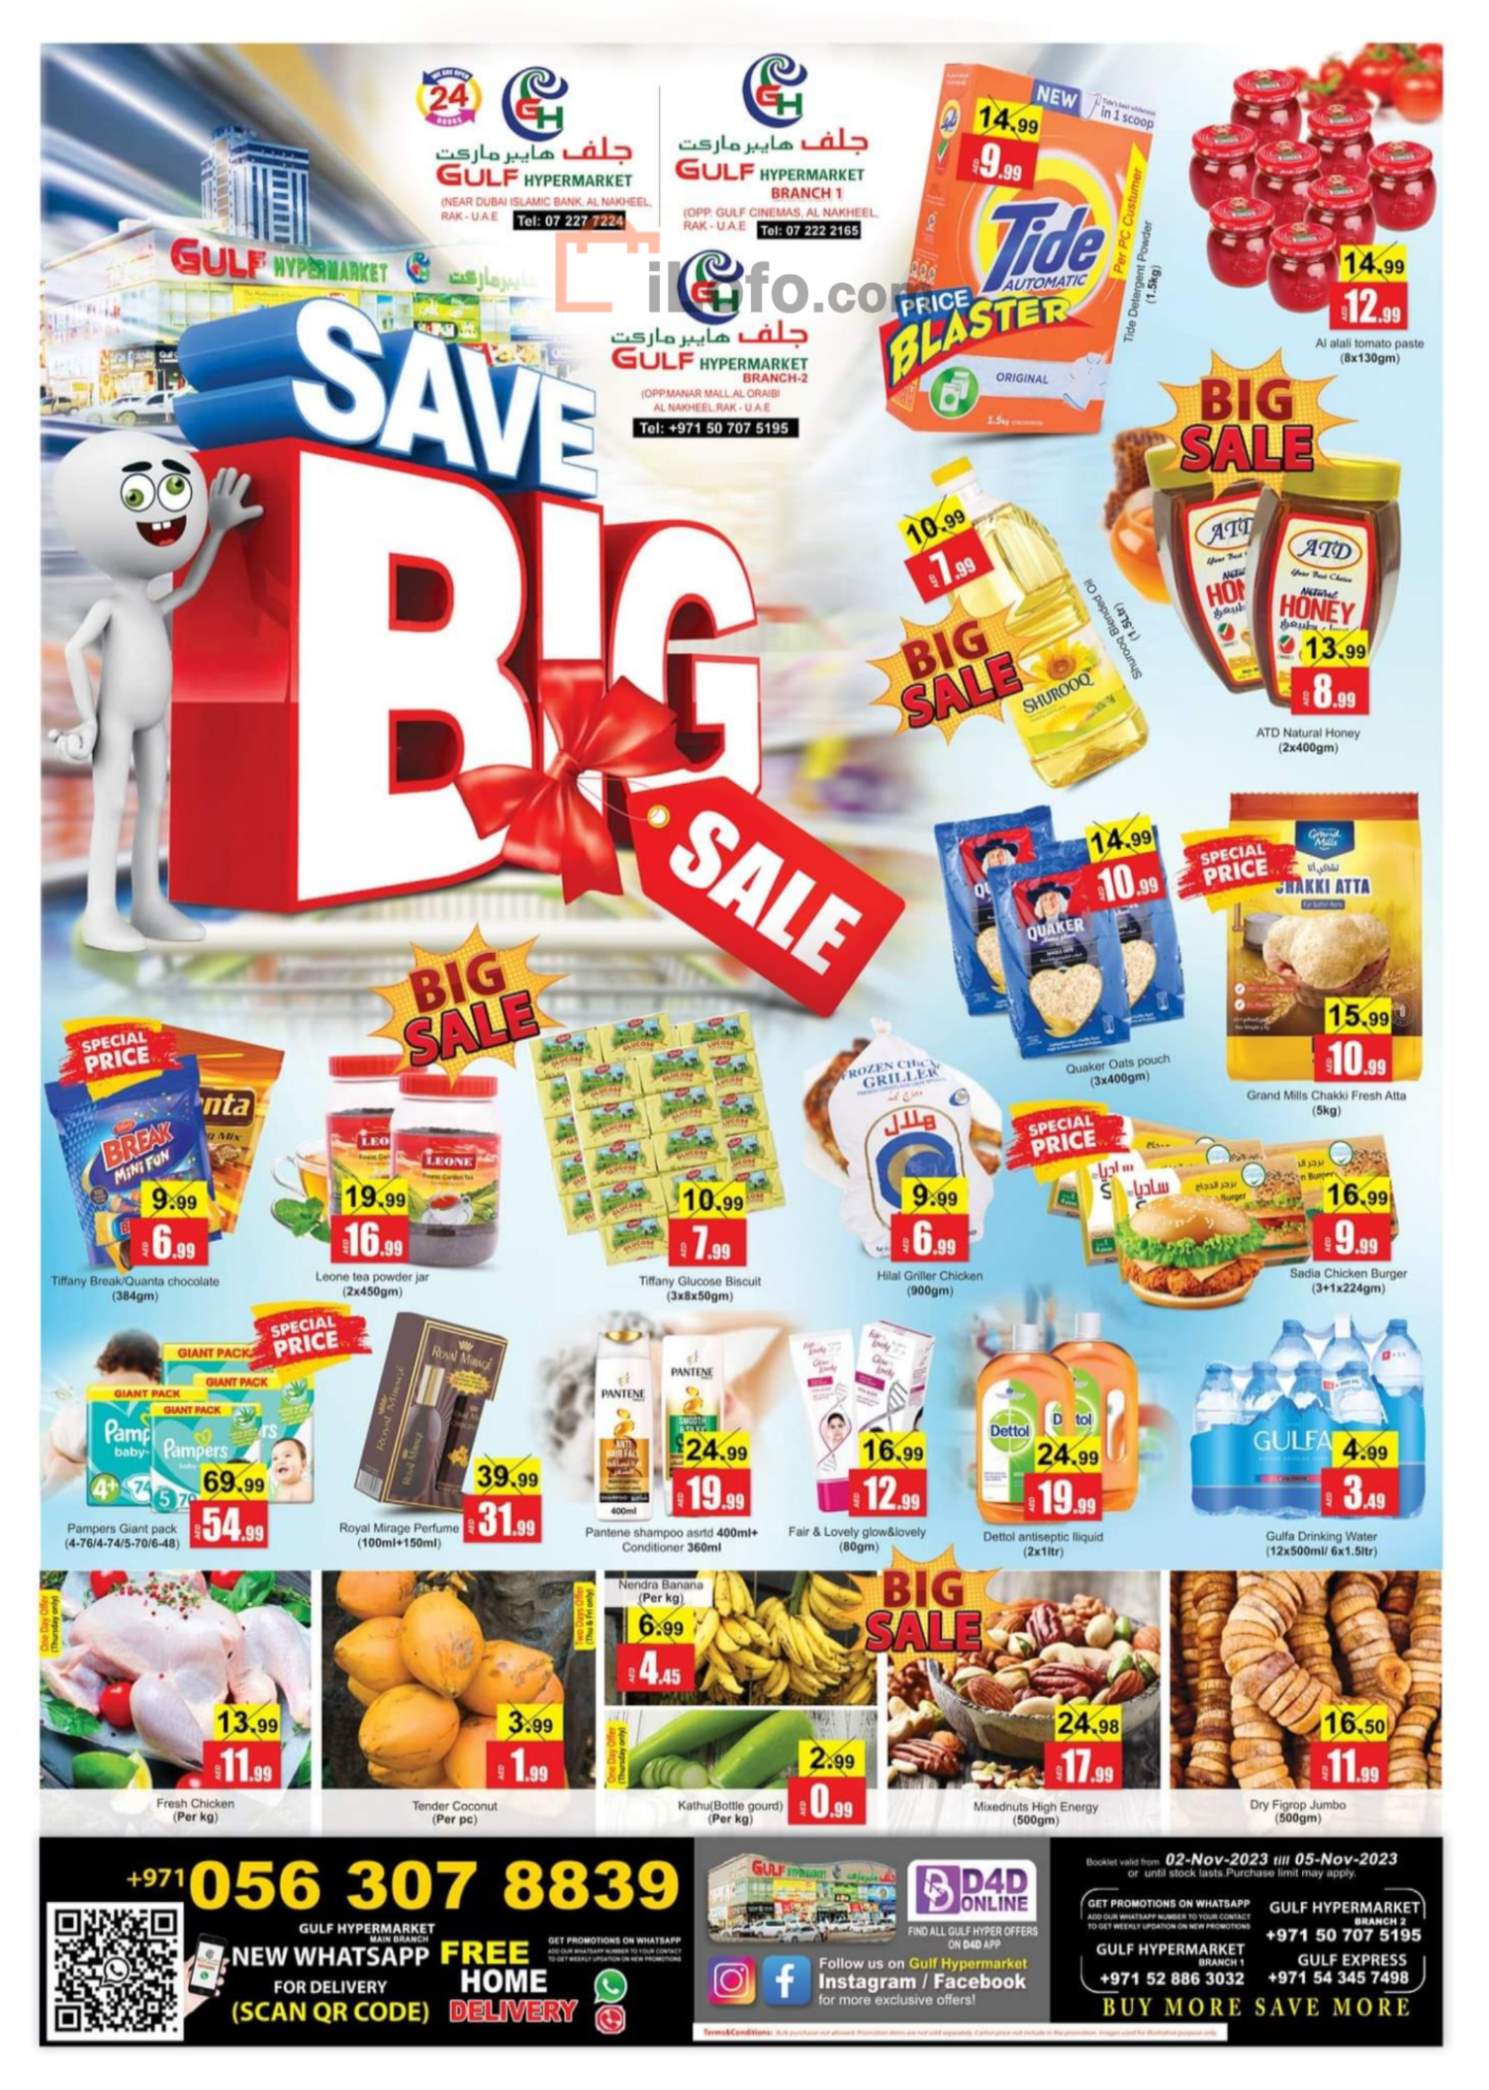 Page 1 at Weekend offers at Gulf hypermarket RAK